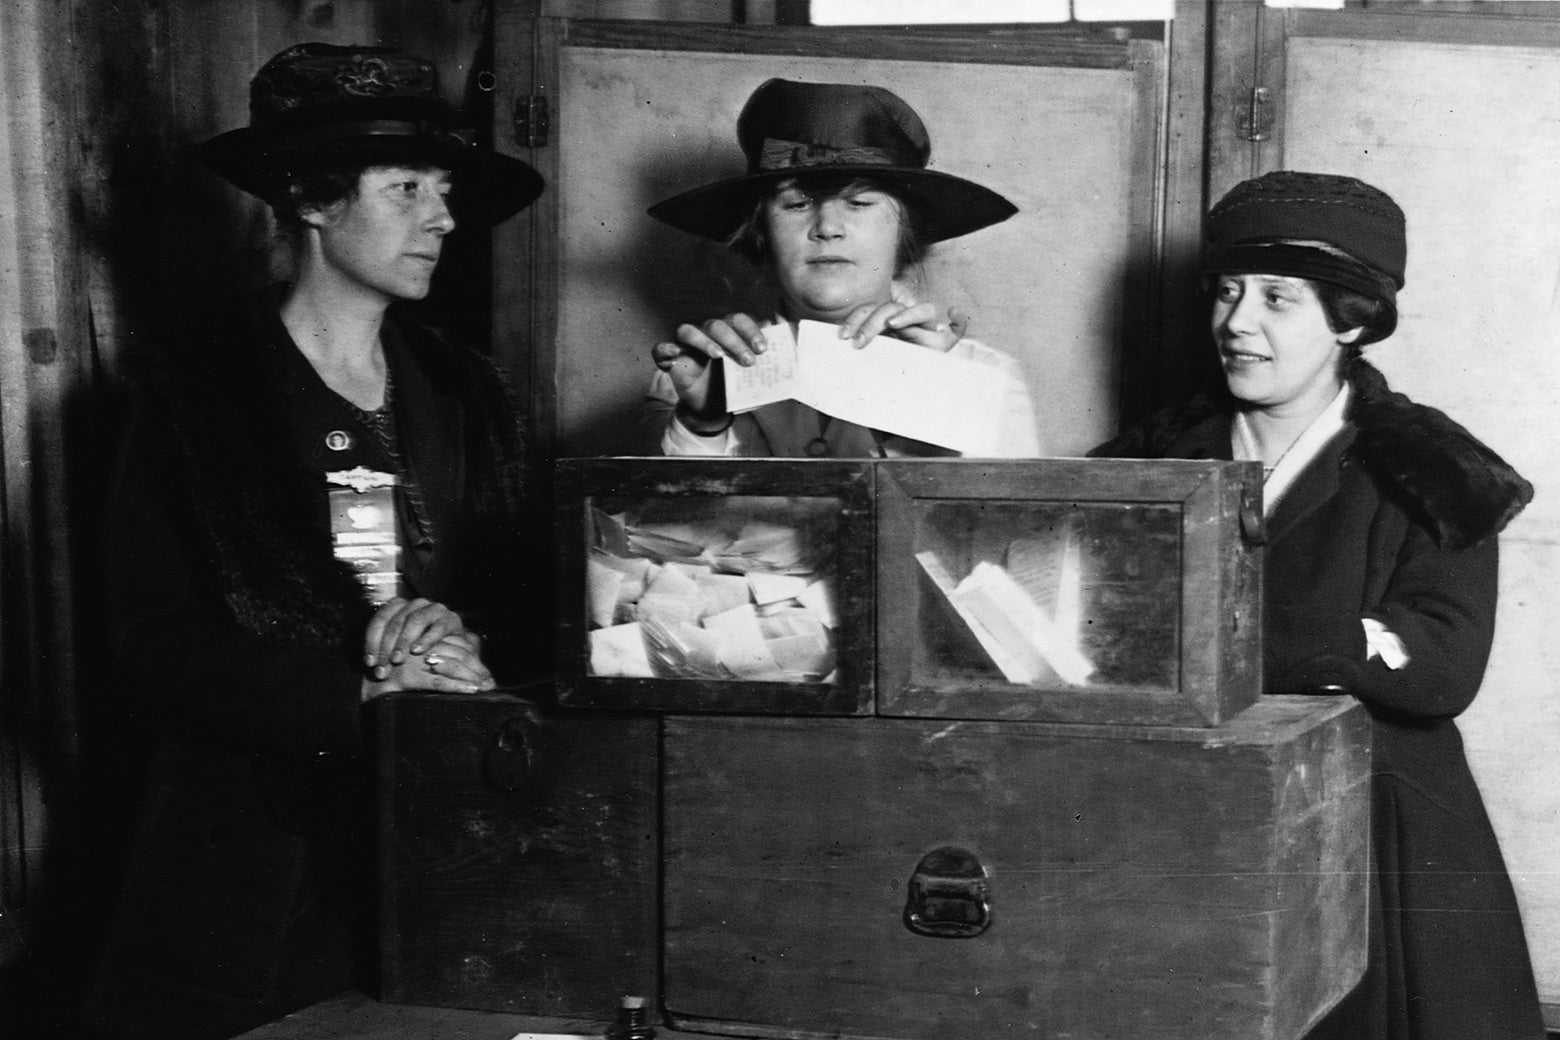 A woman places a ballot in a box as two women on either side of her watch